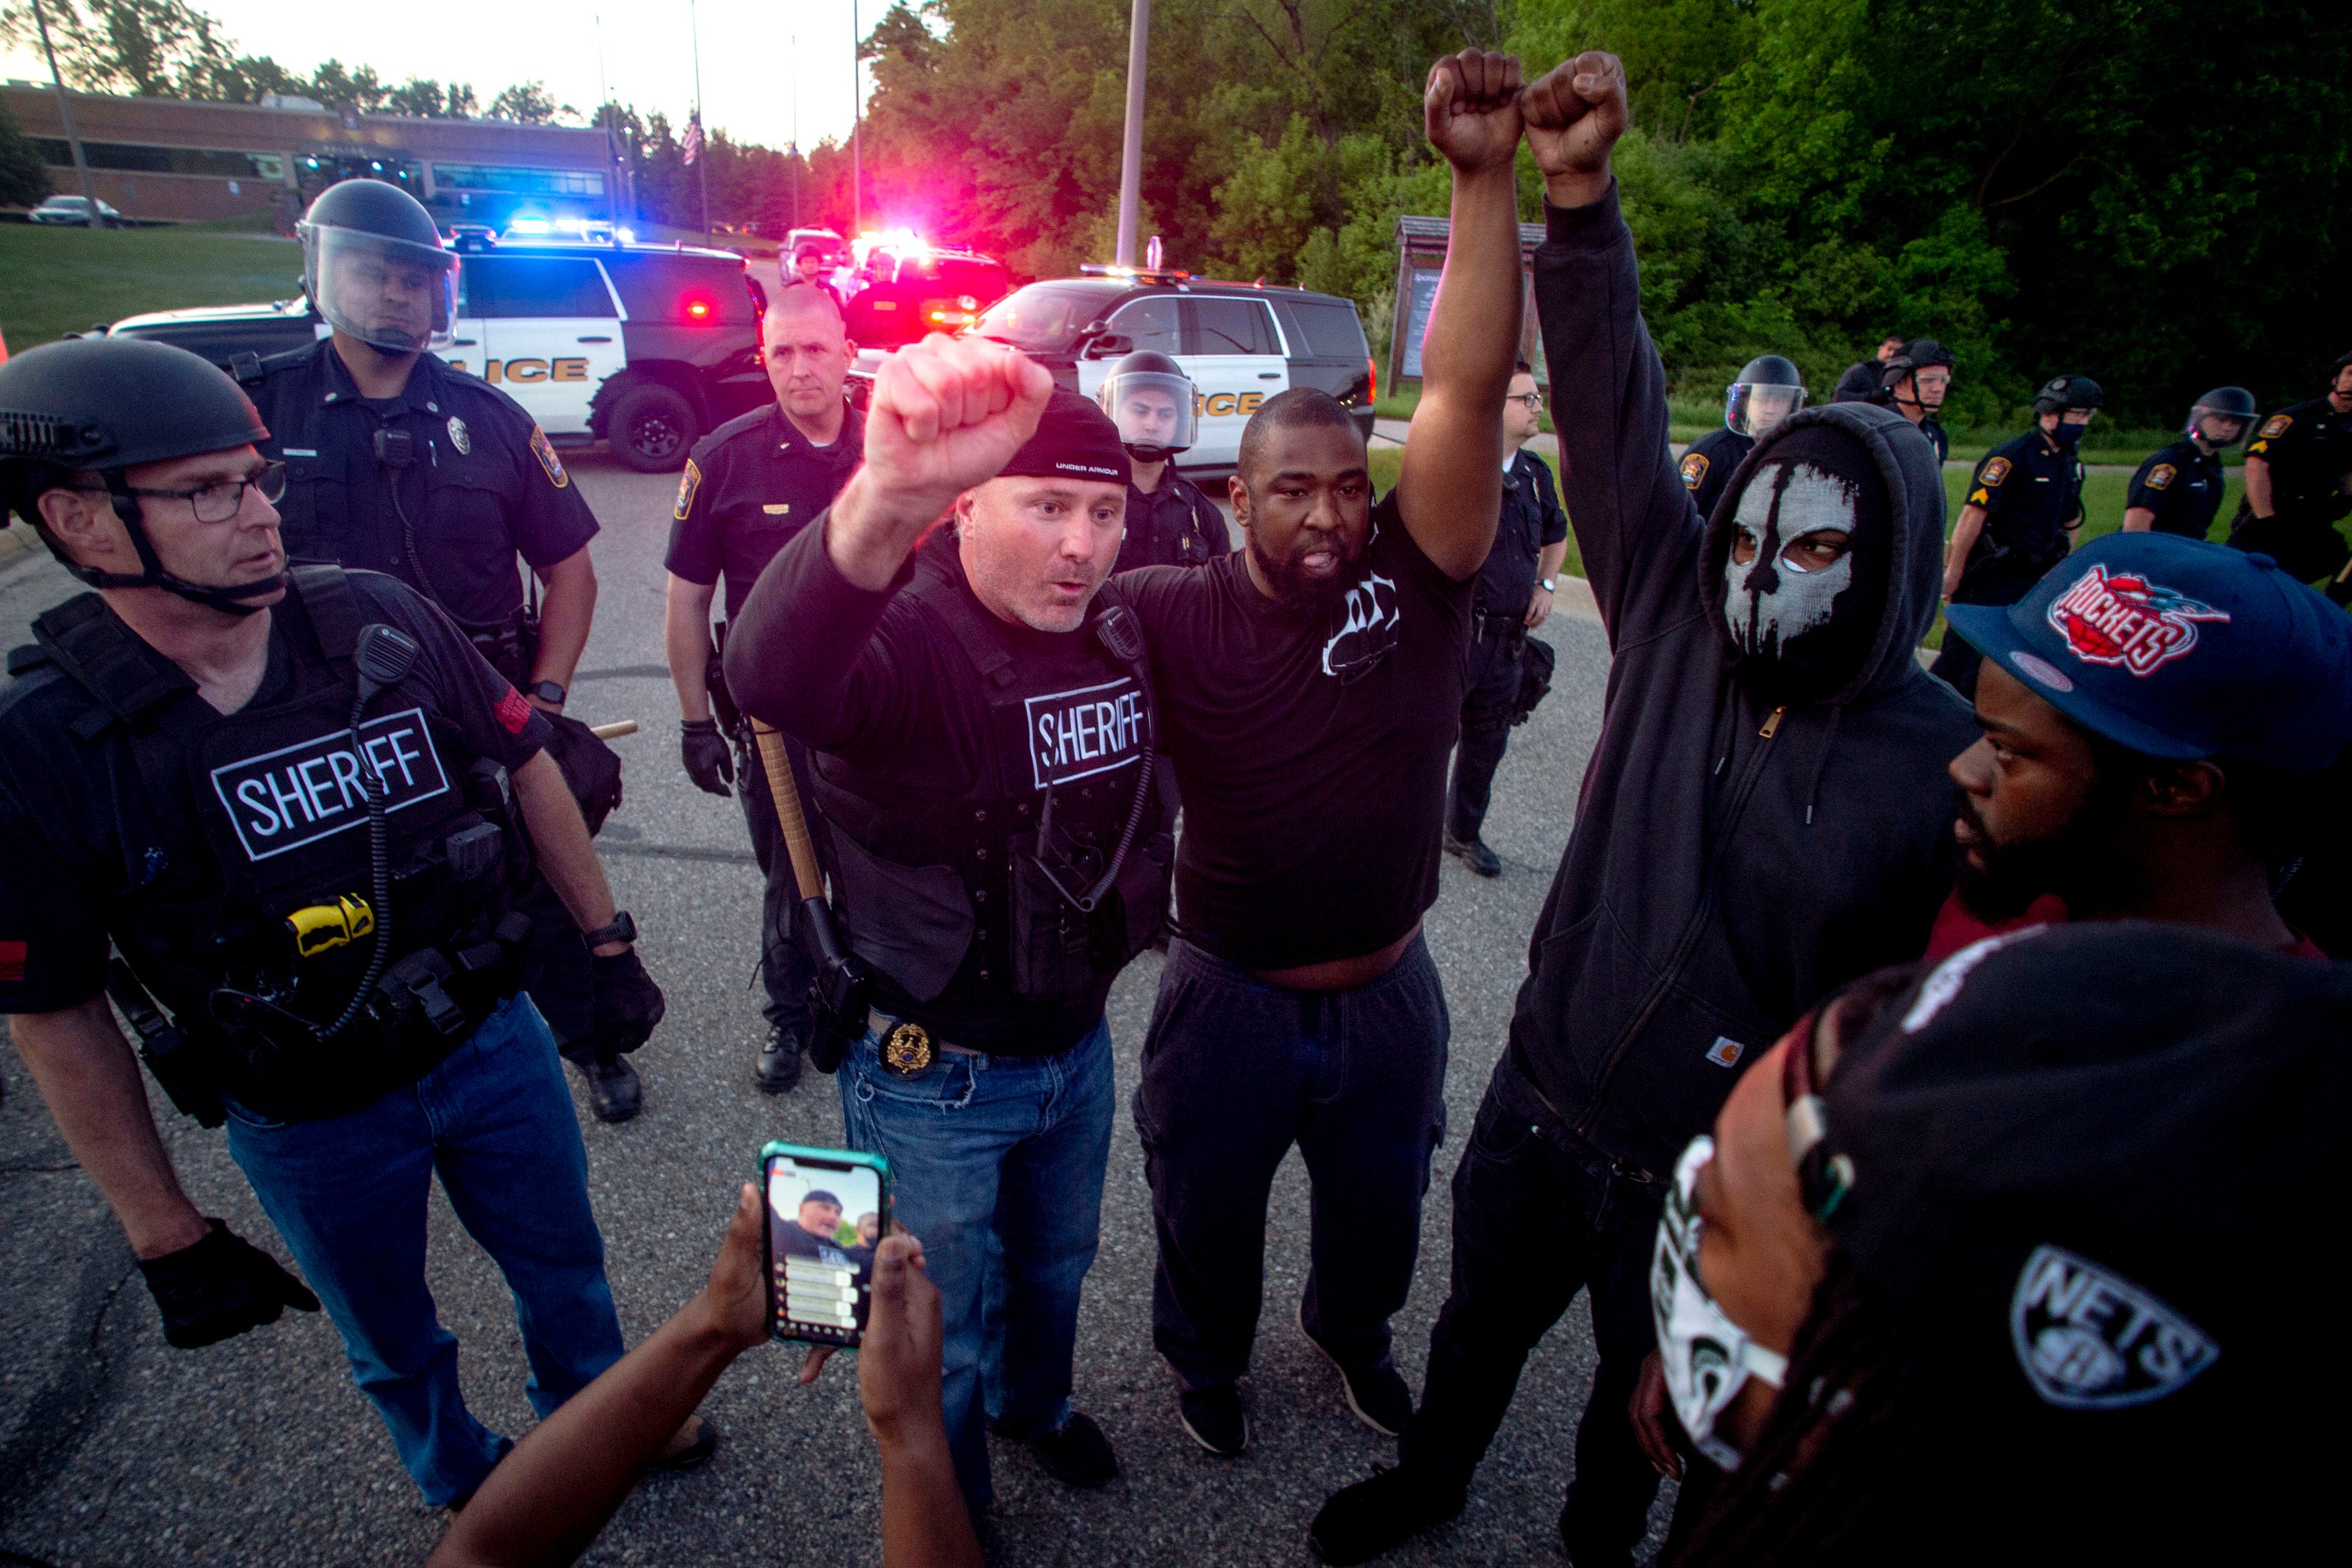 A Genesee County Sheriff's deputy raises his fist in solidarity alongside protesters as hundreds march at a peaceful protest seeking justice for George Floyd on Saturday, May 30, 2020, on Miller Road in Flint Township, M.I. Floyd died in police custody on Memorial Day in Minneapolis.